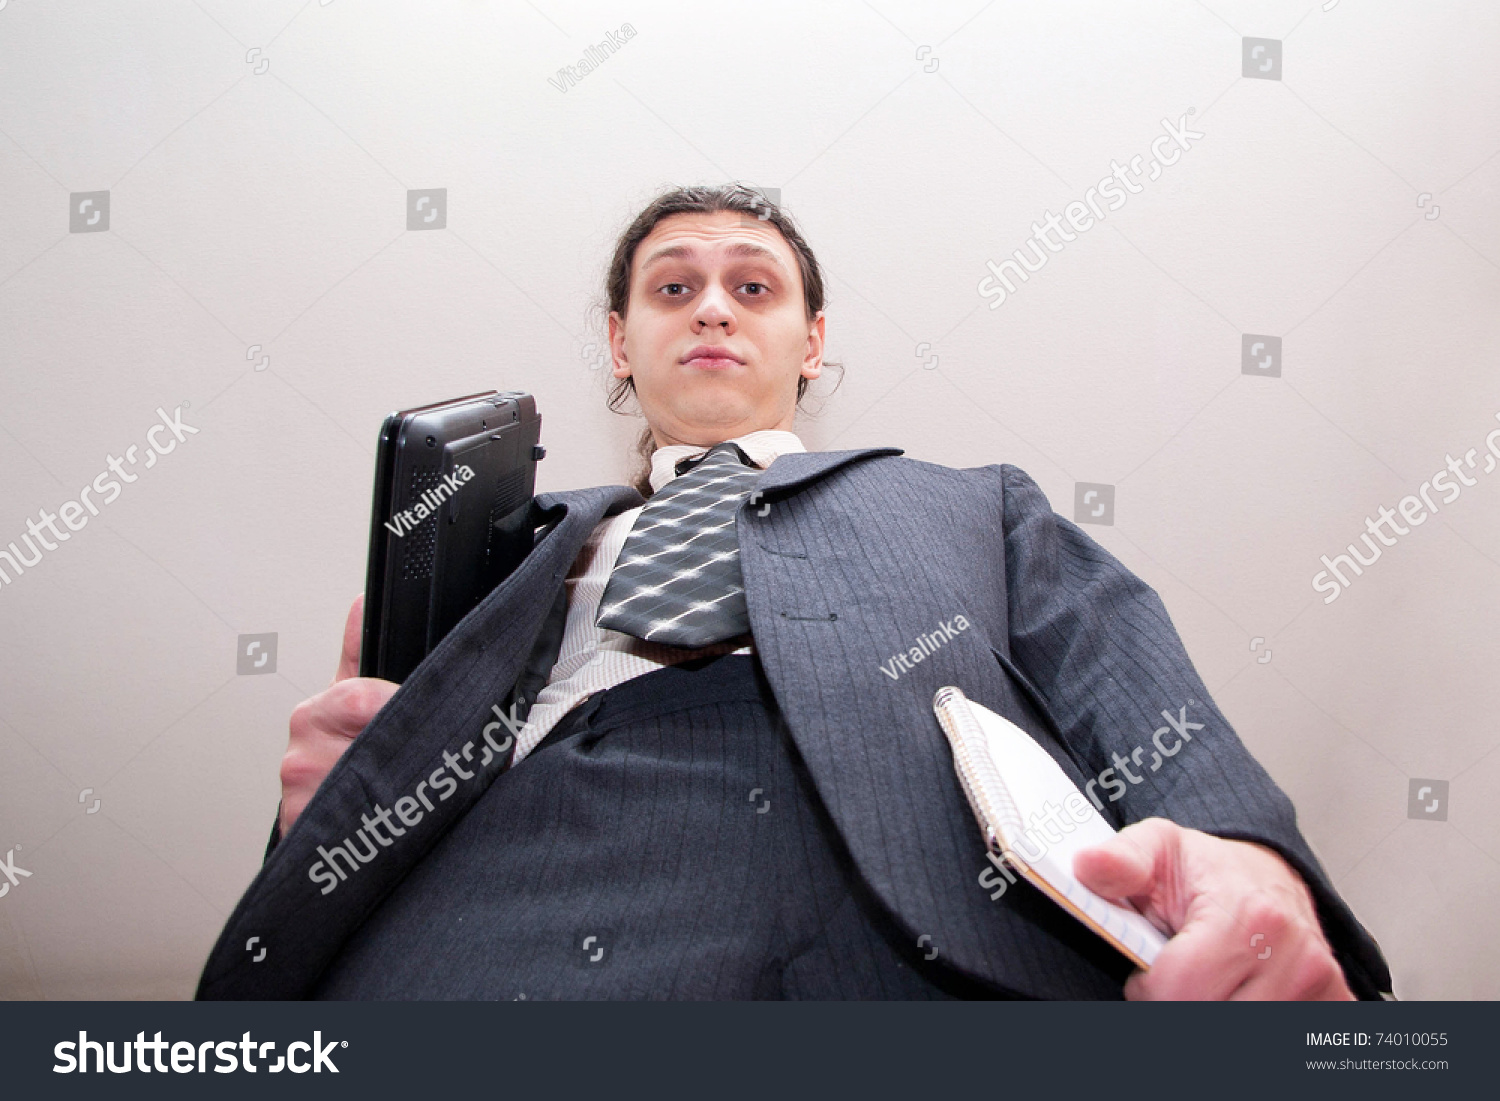 stock-photo-angry-big-boss-is-looking-down-at-camera-ready-for-your-symbols-or-logo-74010055.jpg